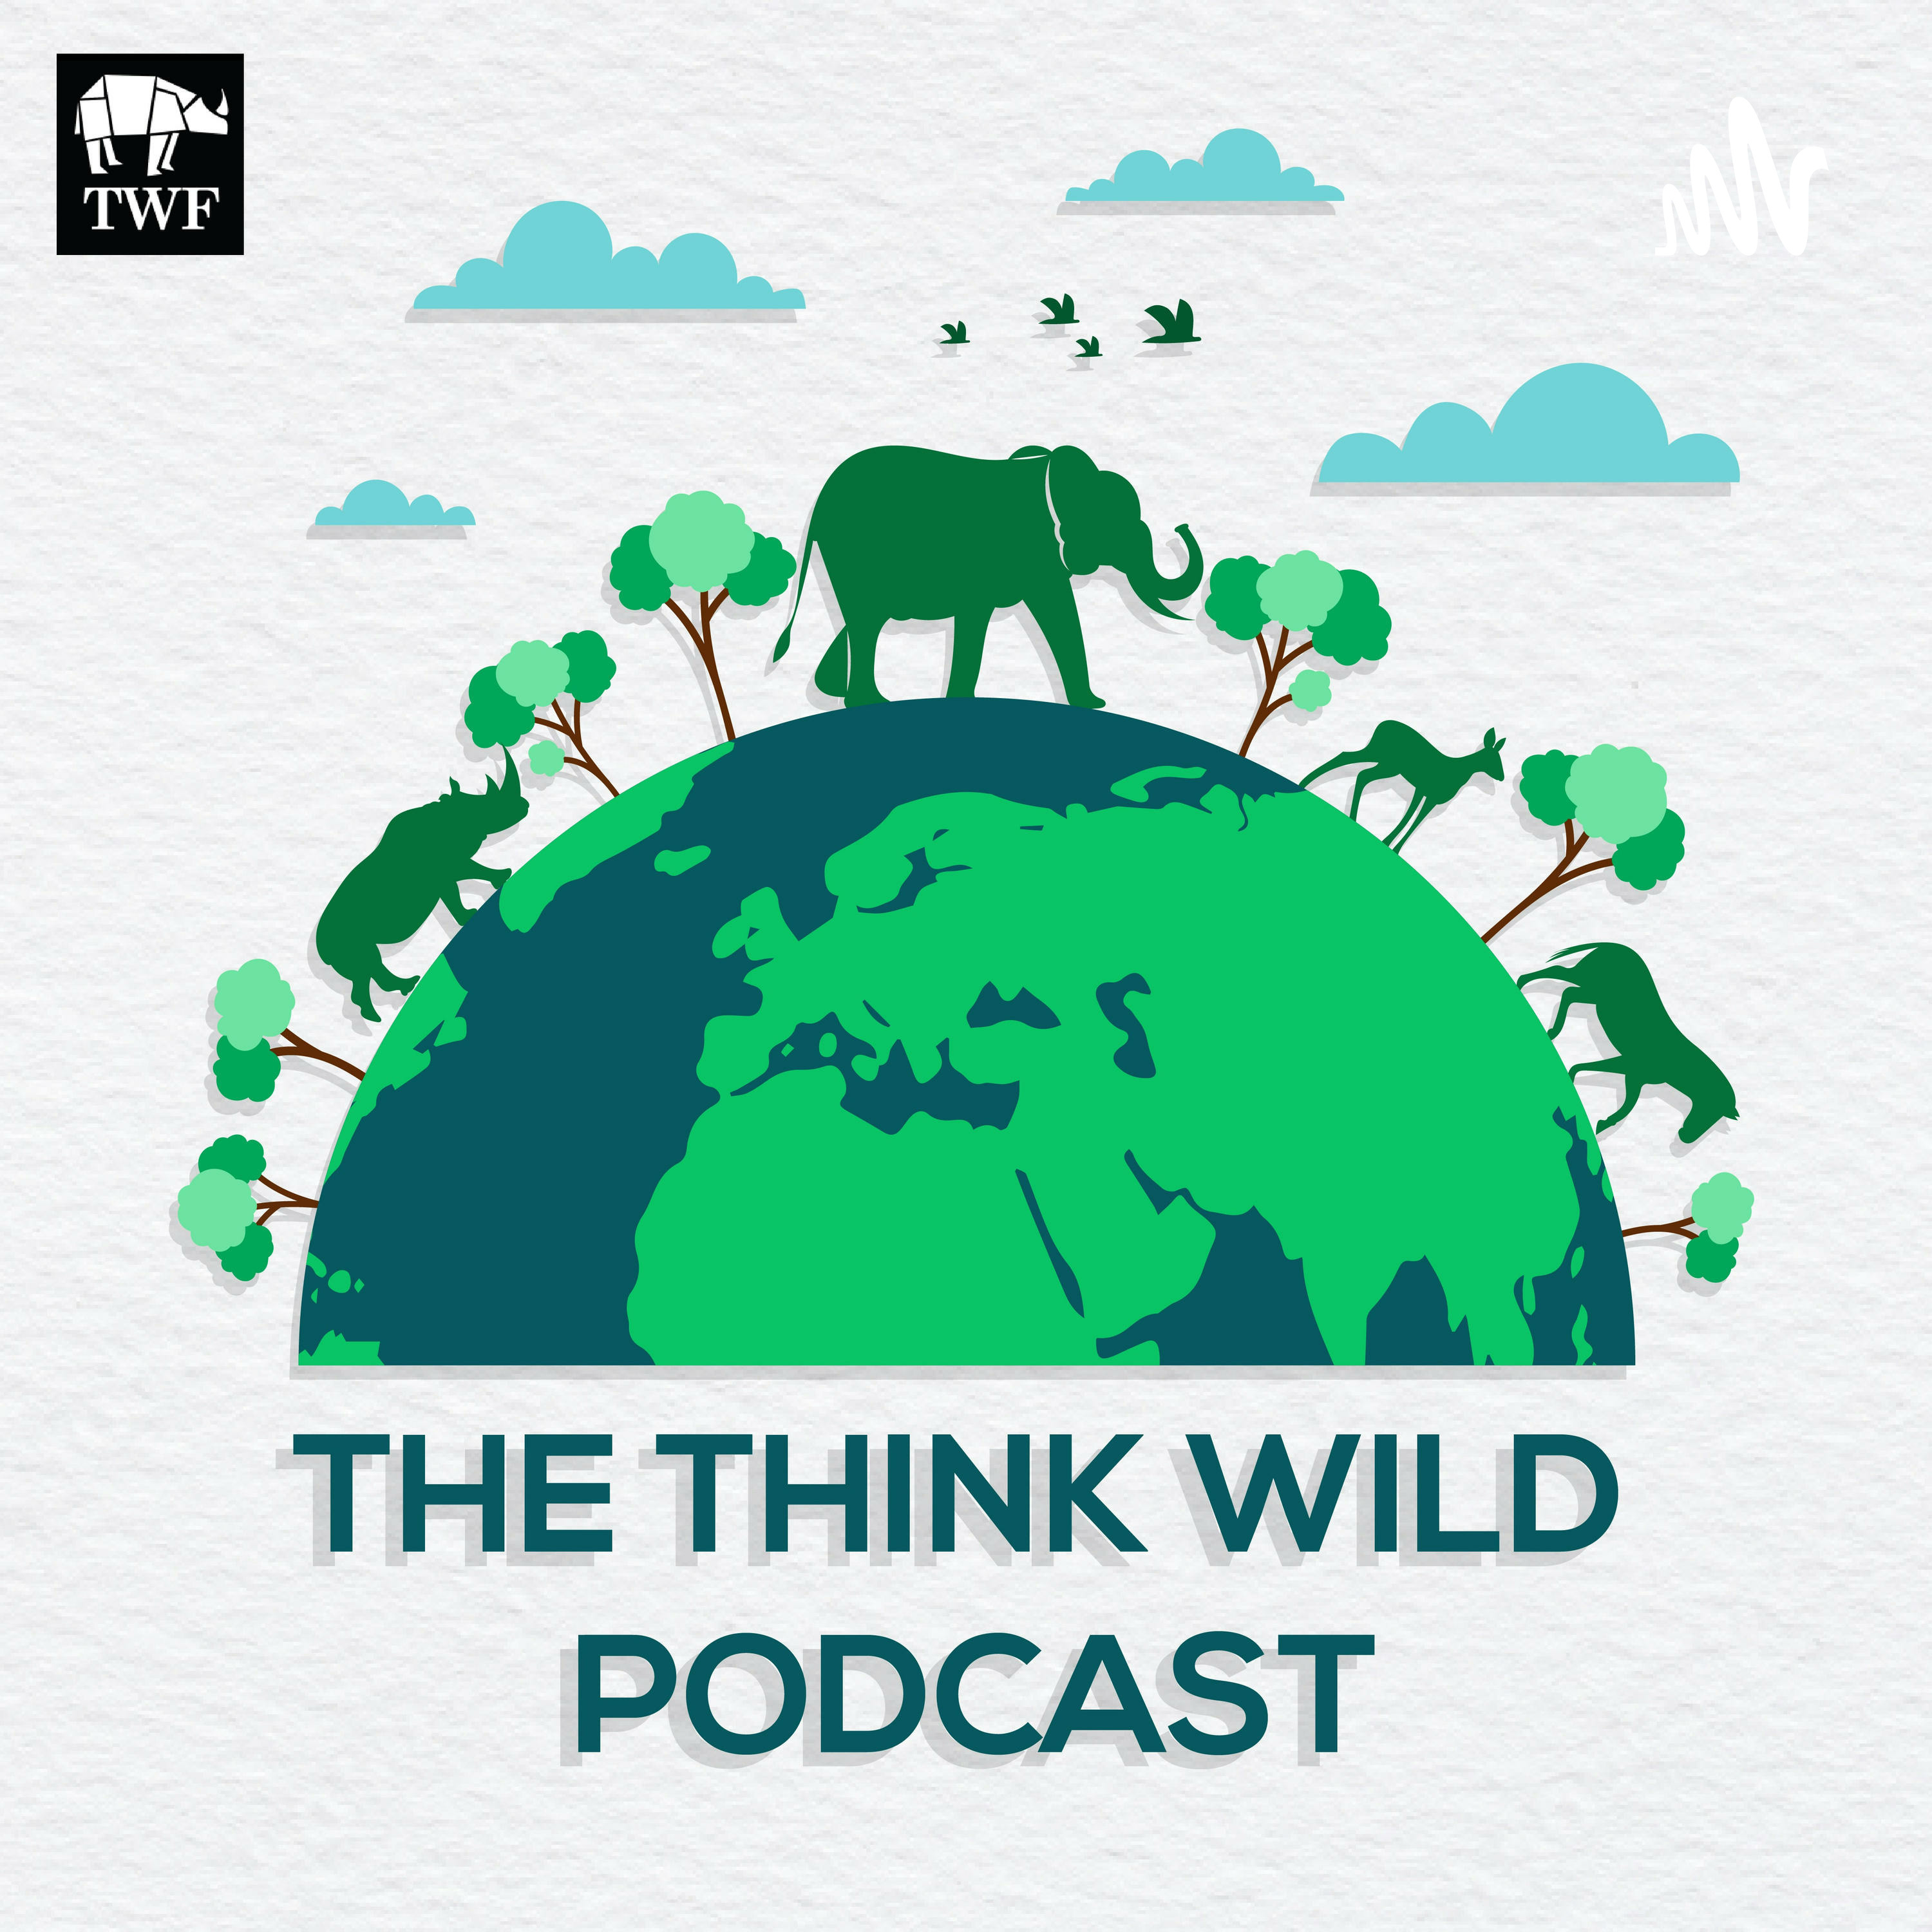 Episode 56: Safeguarding the Mammals of the Eastern Ghats with Dr. Vikram Aditya, Principal Scientist at the Centre for Wildlife Studies